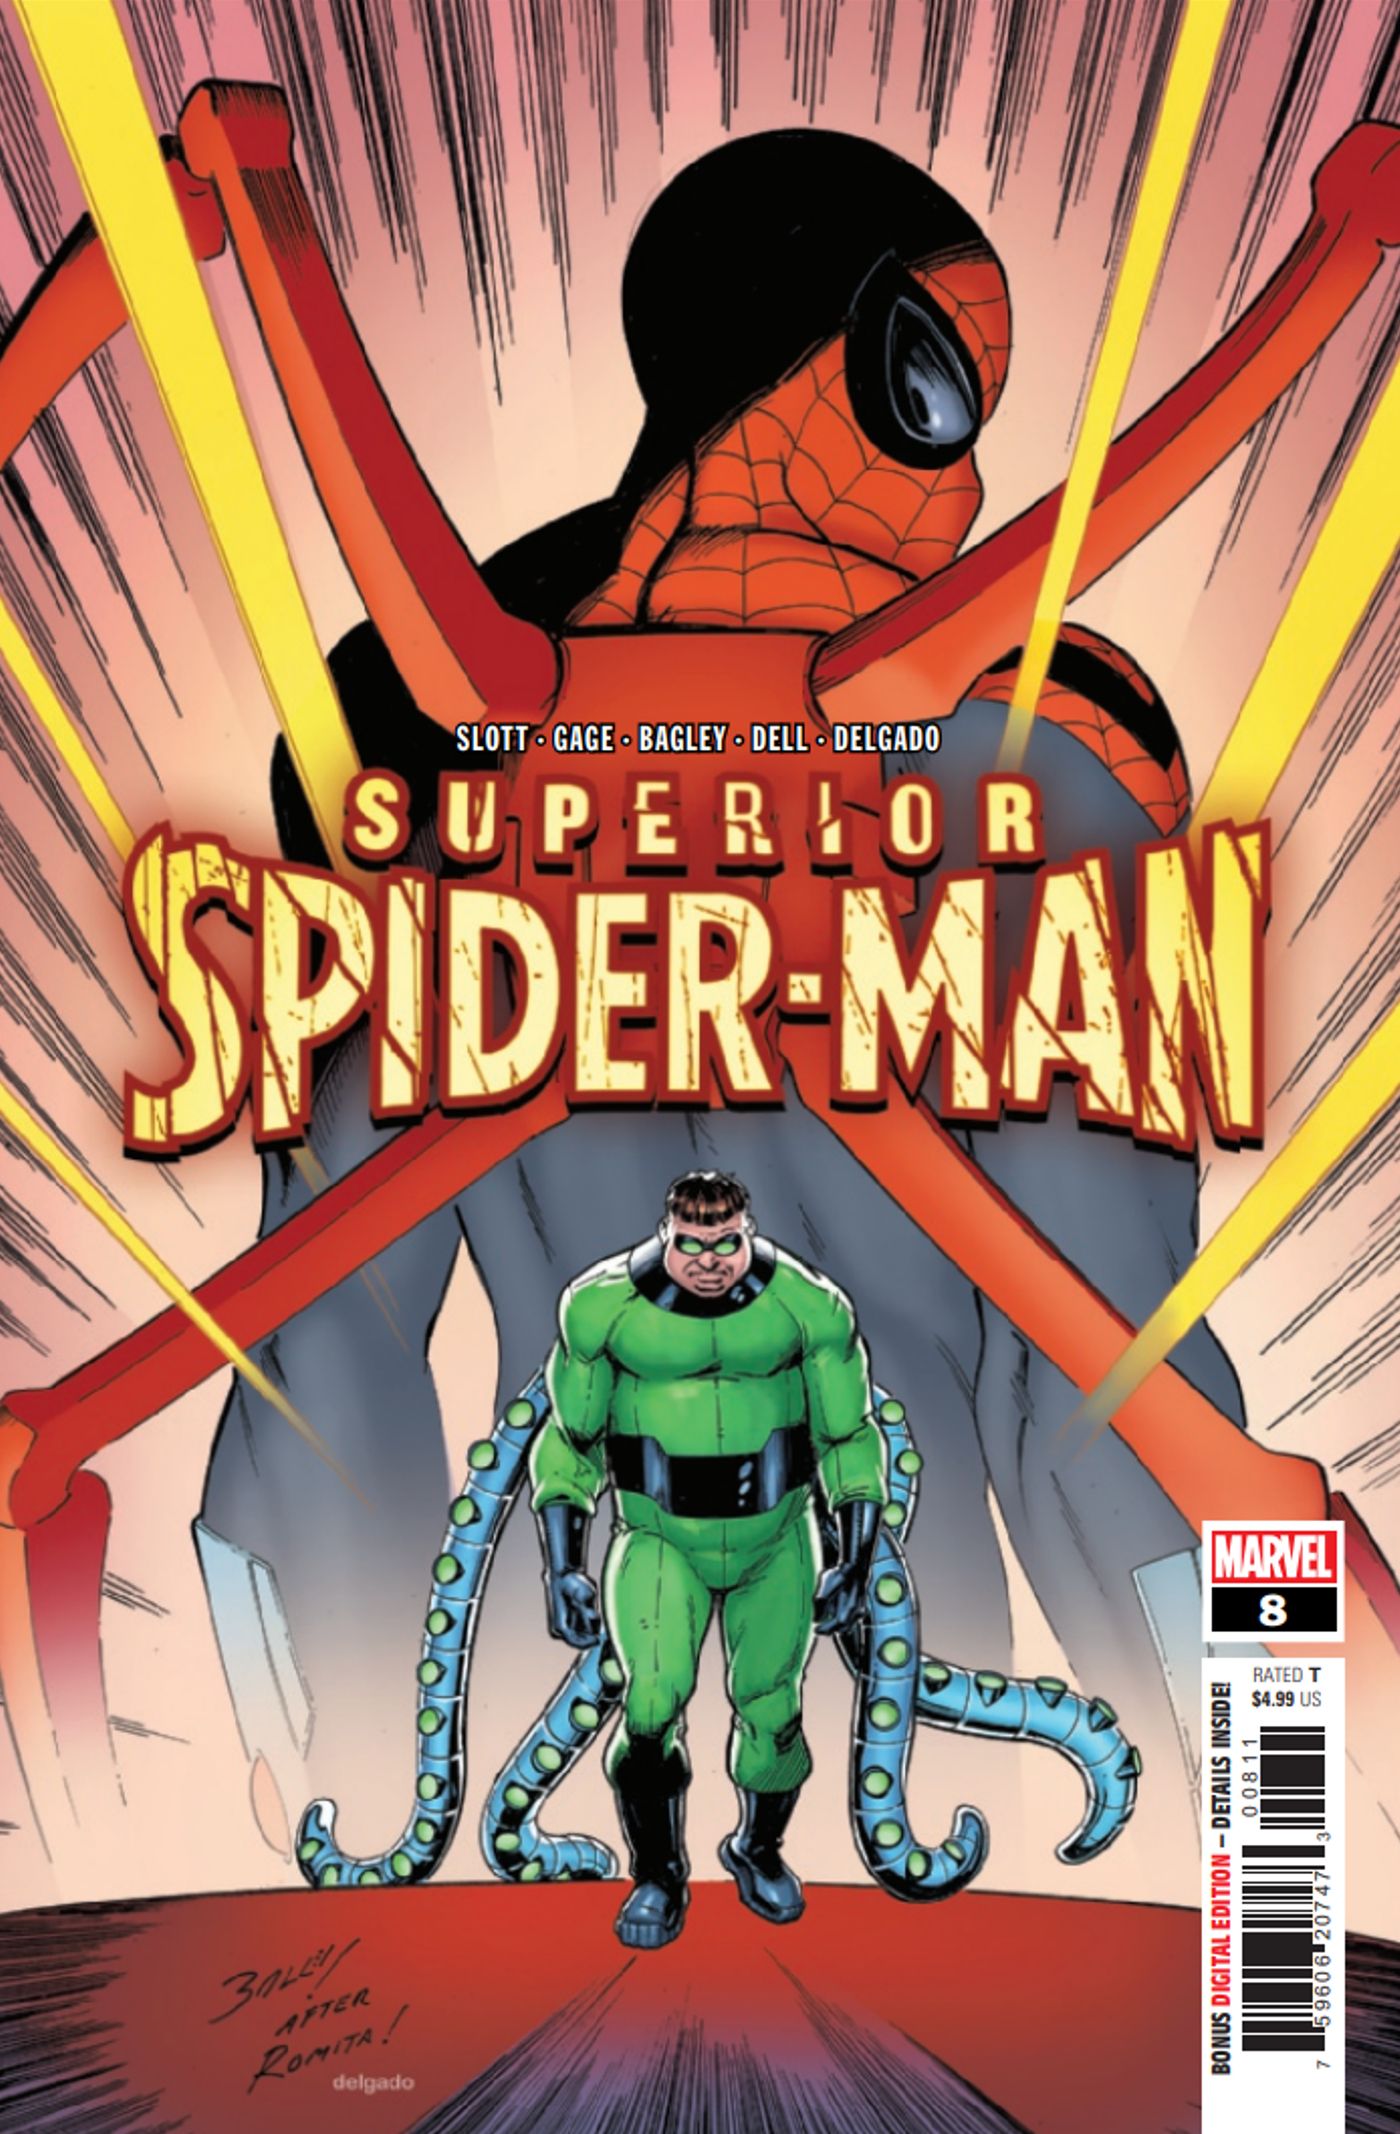 Superior Spider-Man #8 cover Doctor Octopus walks away from a bigger Superior Spider-Man.